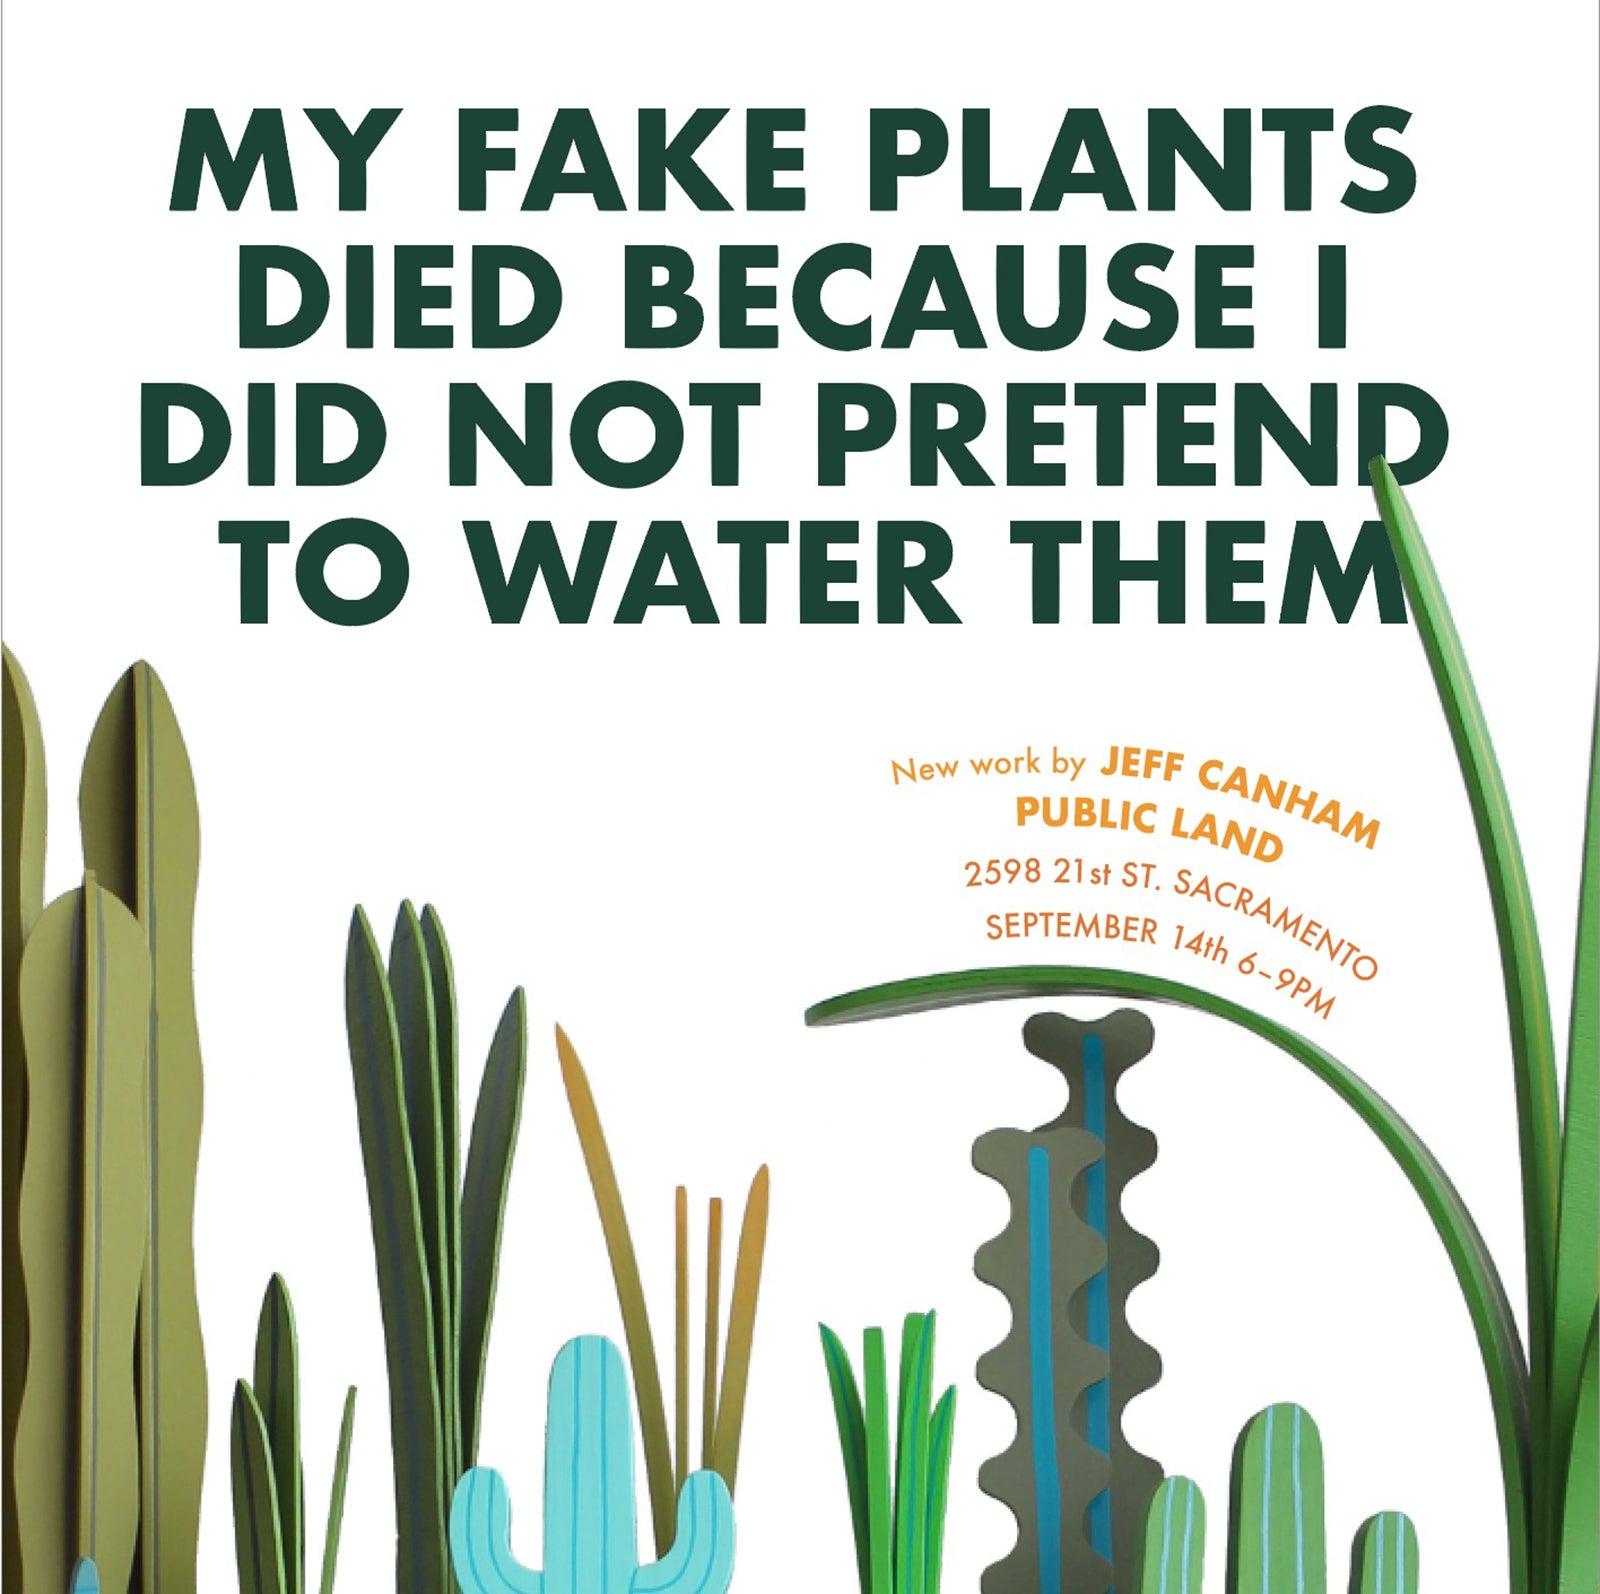 Jeff Canham's "My Fake Plants Died Because I Did Not Pretend To Water Them” @ Public Land Gallery